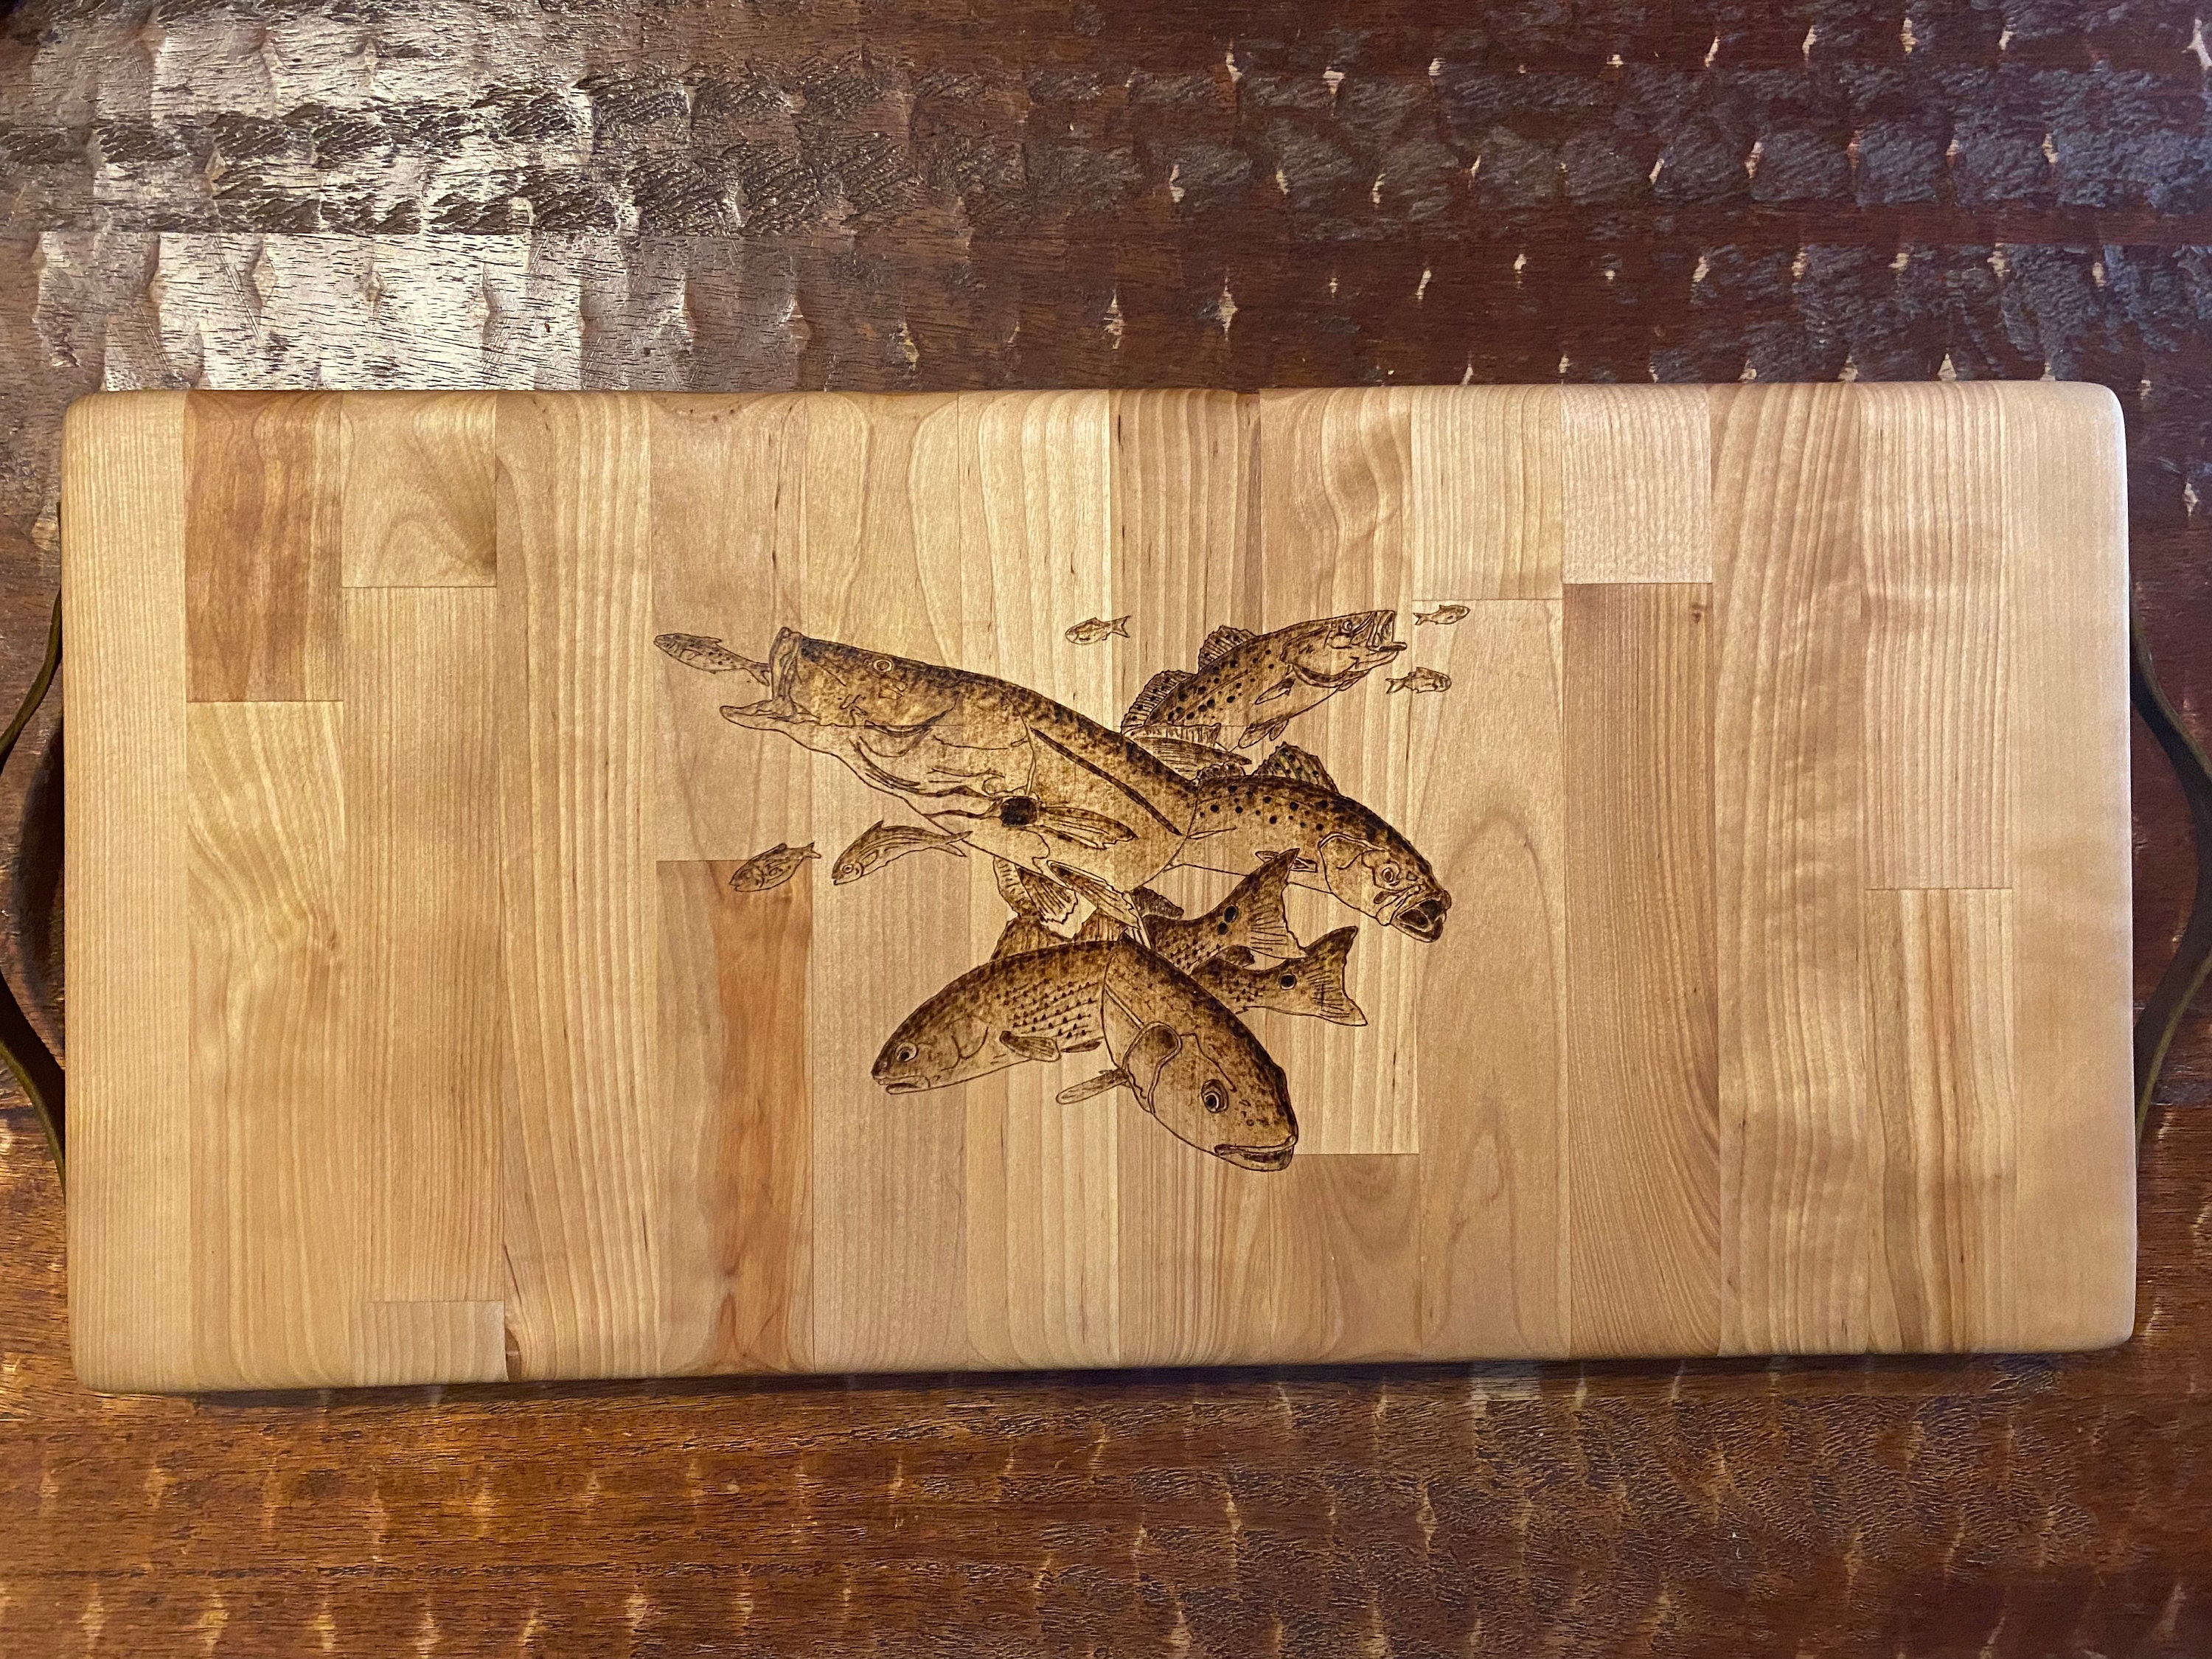 Fishing Outline - Michigan - Wooden Engraved - Cutting Board